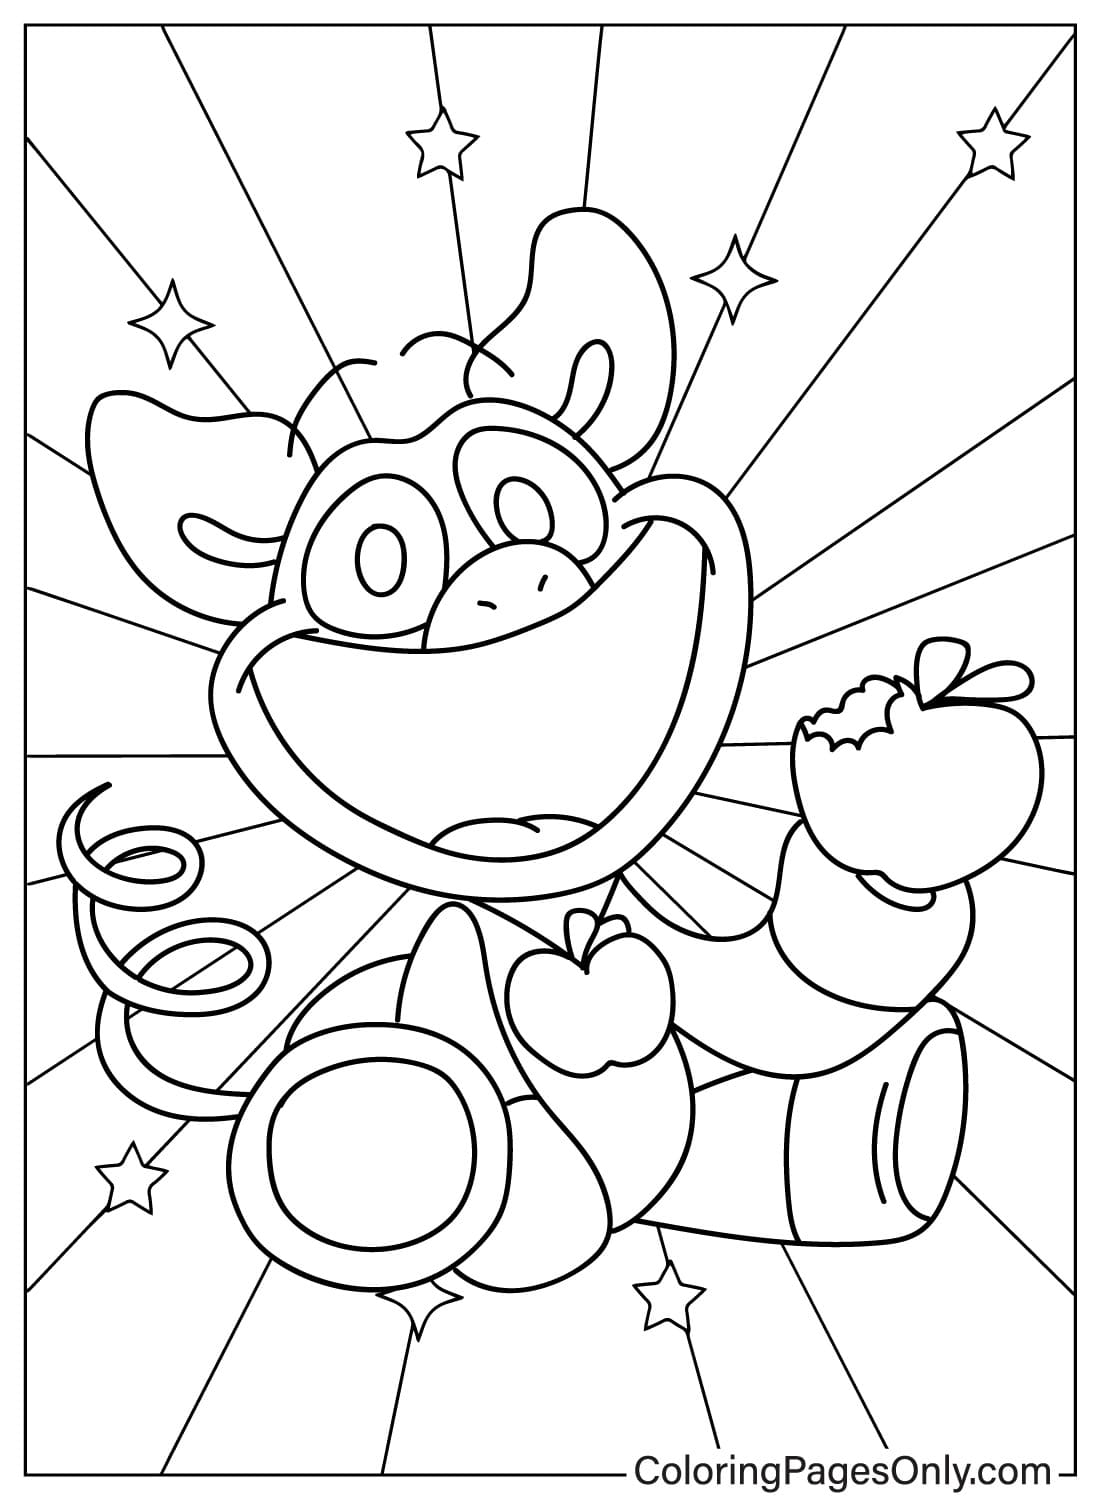 PickyPiggy Coloring Page from PickyPiggy